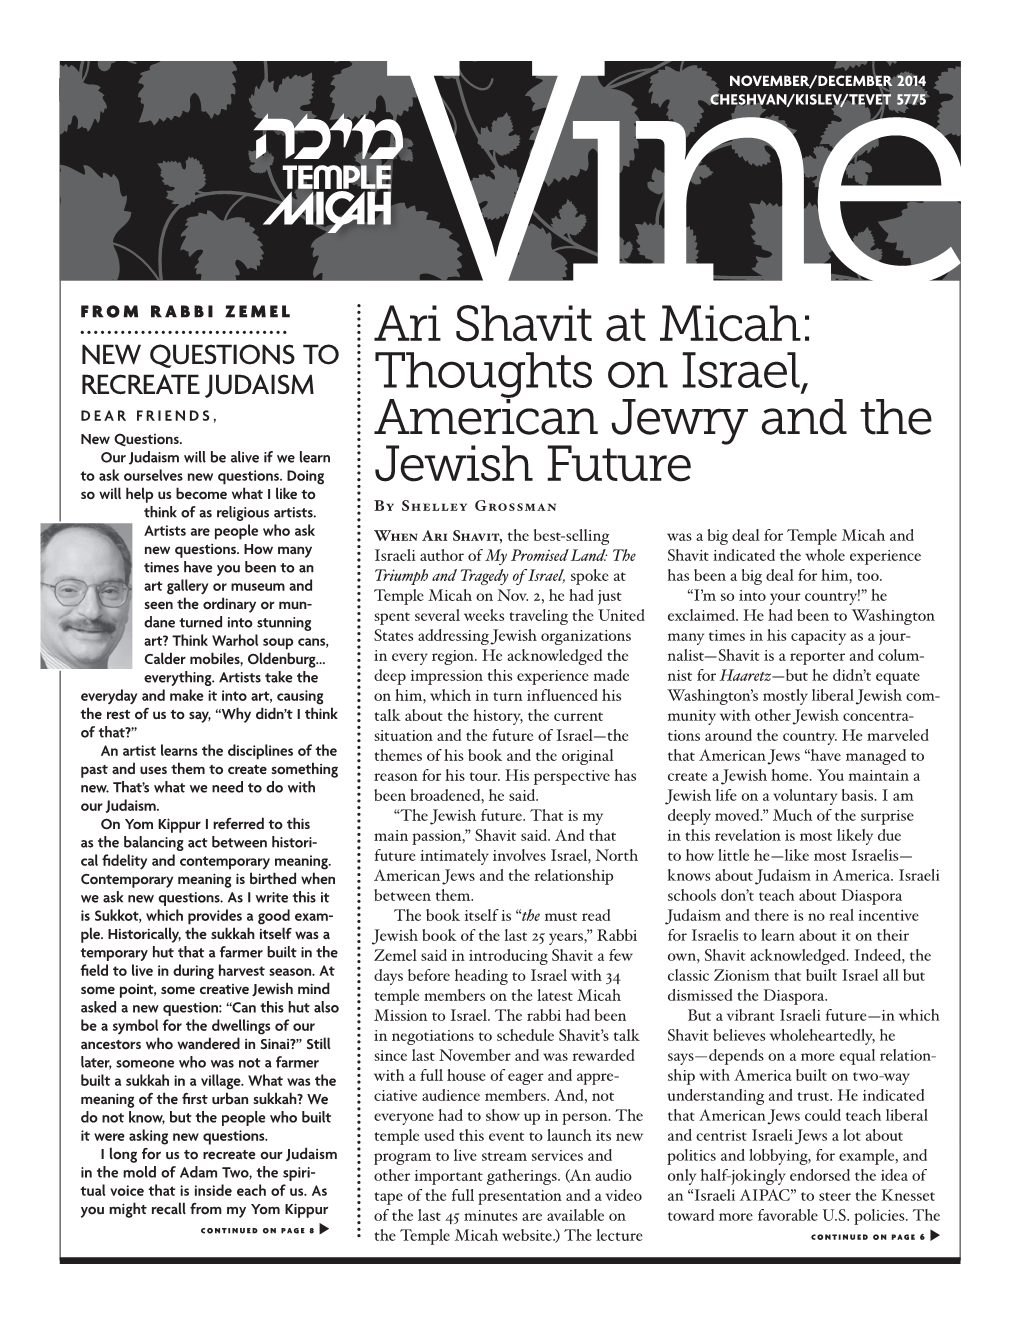 Ari Shavit at Micah: NEW QUESTIONS to RECREATE JUDAISM Thoughts on Israel, DEAR FRIENDS, New Questions